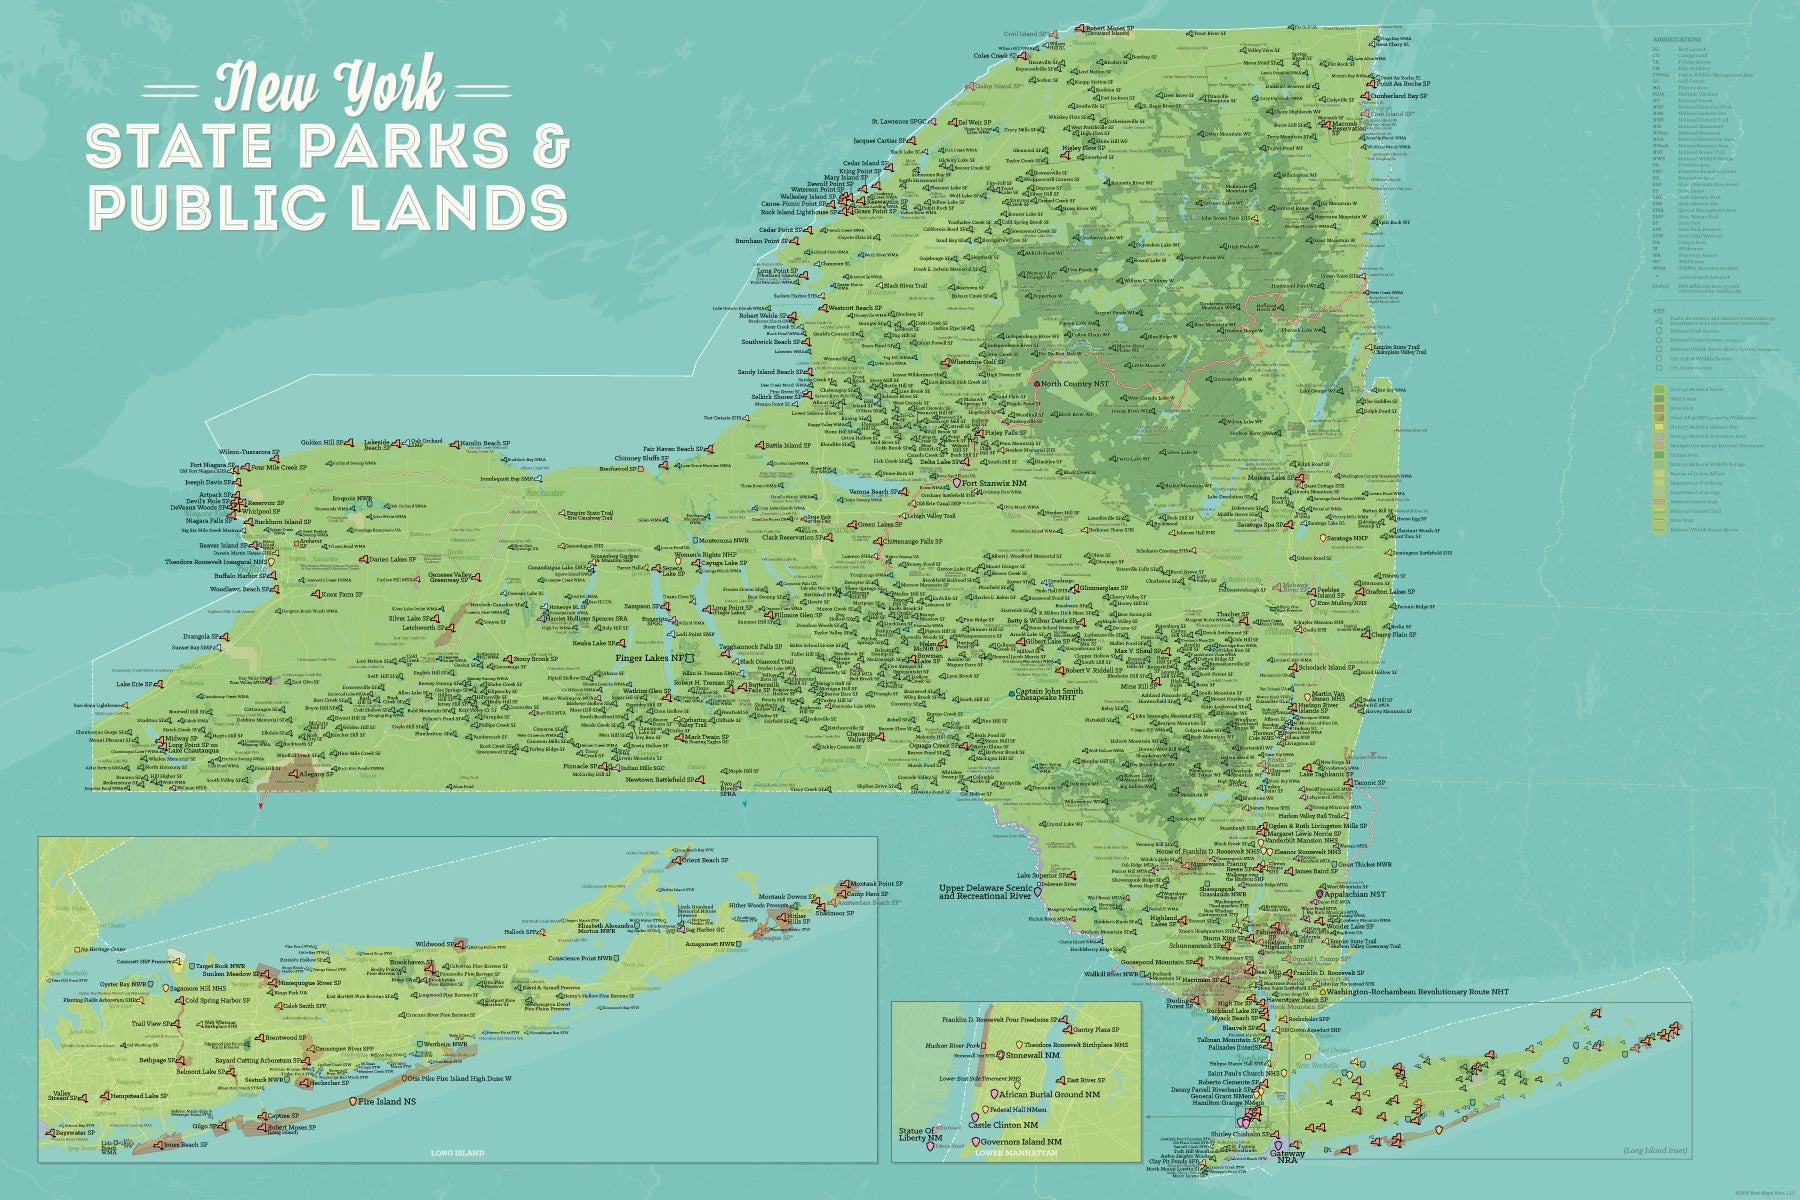 ny state parks map New York State Parks Public Land Map 24x36 Poster Best Maps Ever ny state parks map